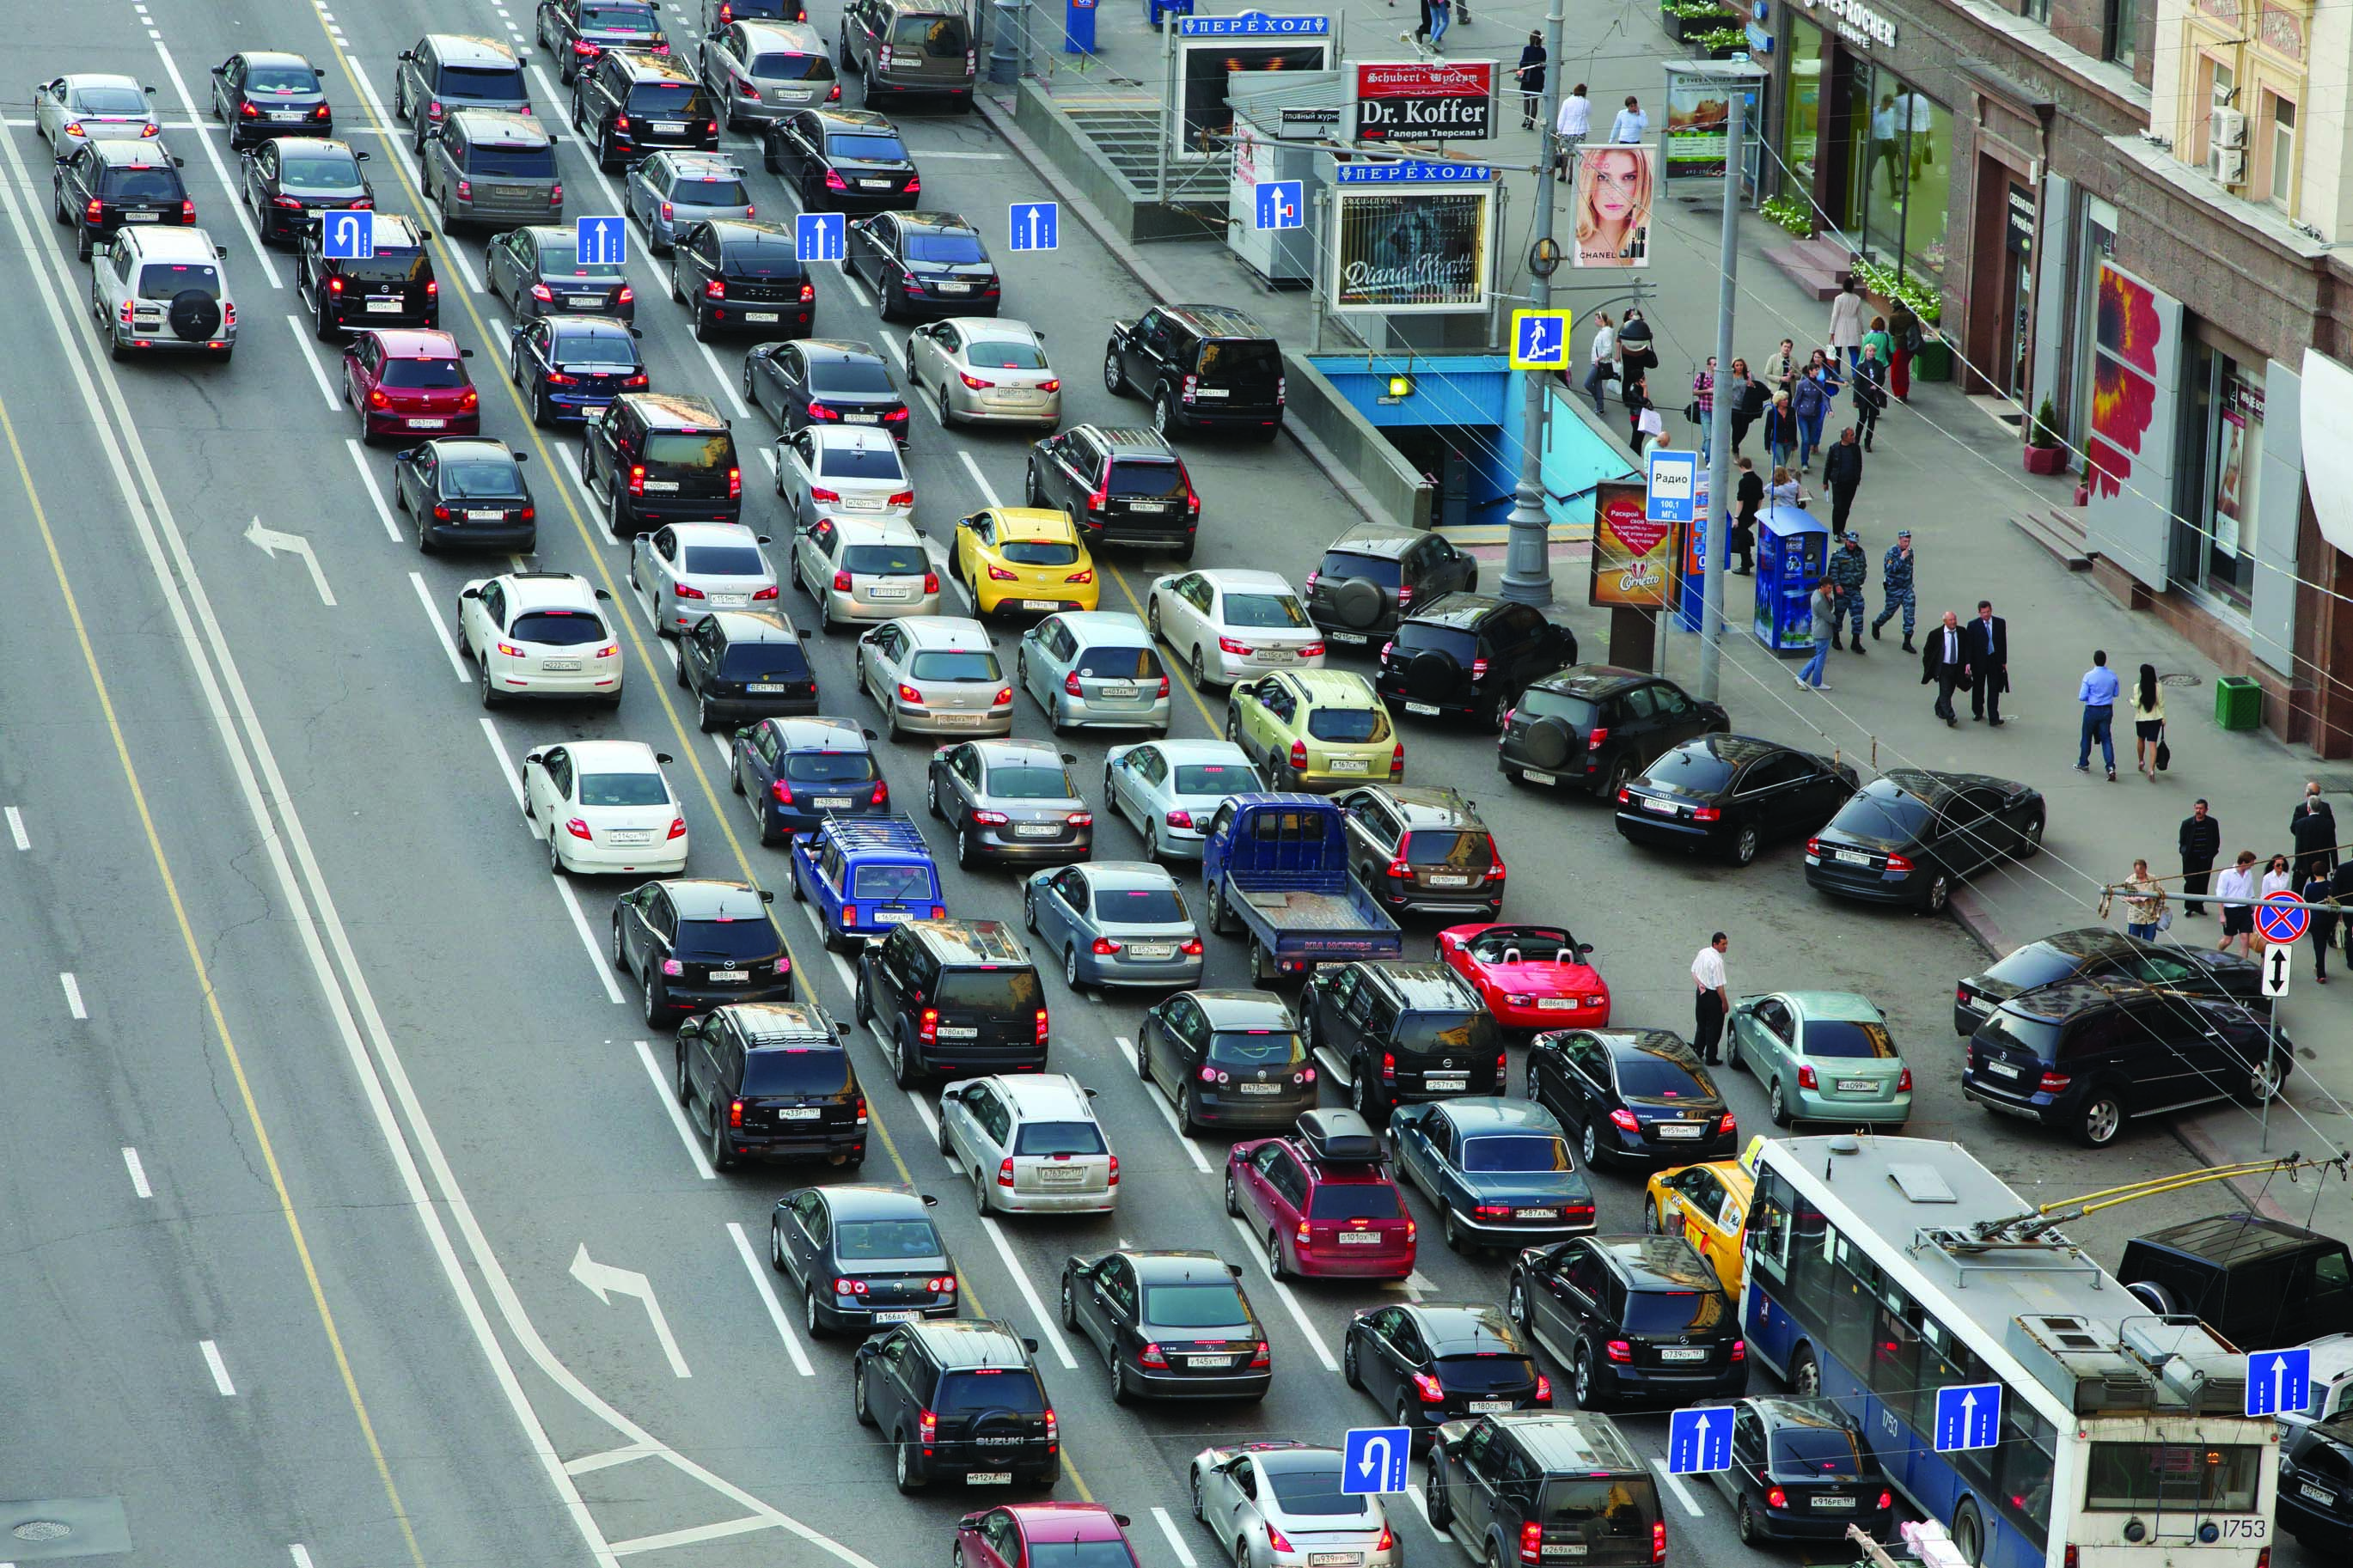 Moscow's traffic congestion